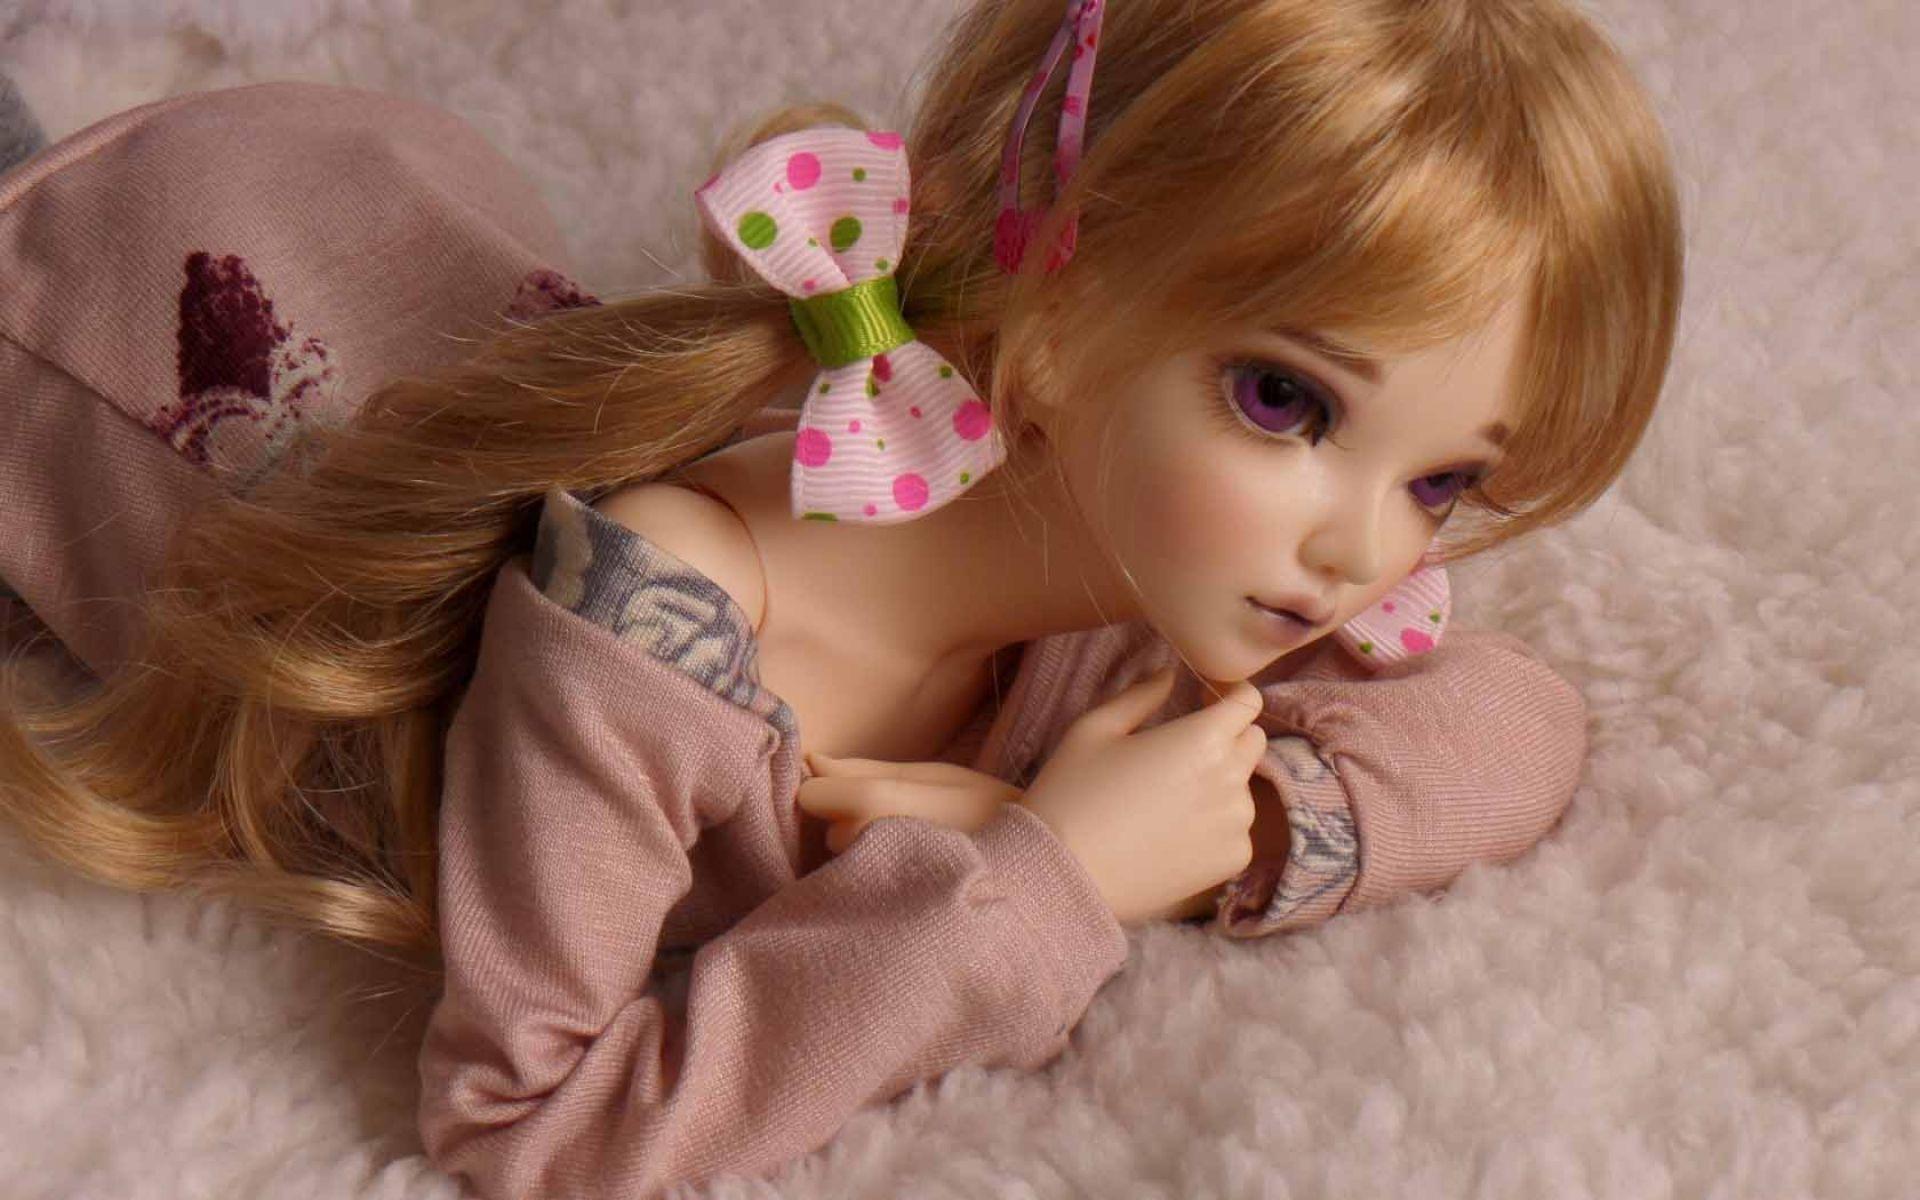 Lovely Doll Blonde Toy. HD Anime Wallpaper for Mobile and Desktop